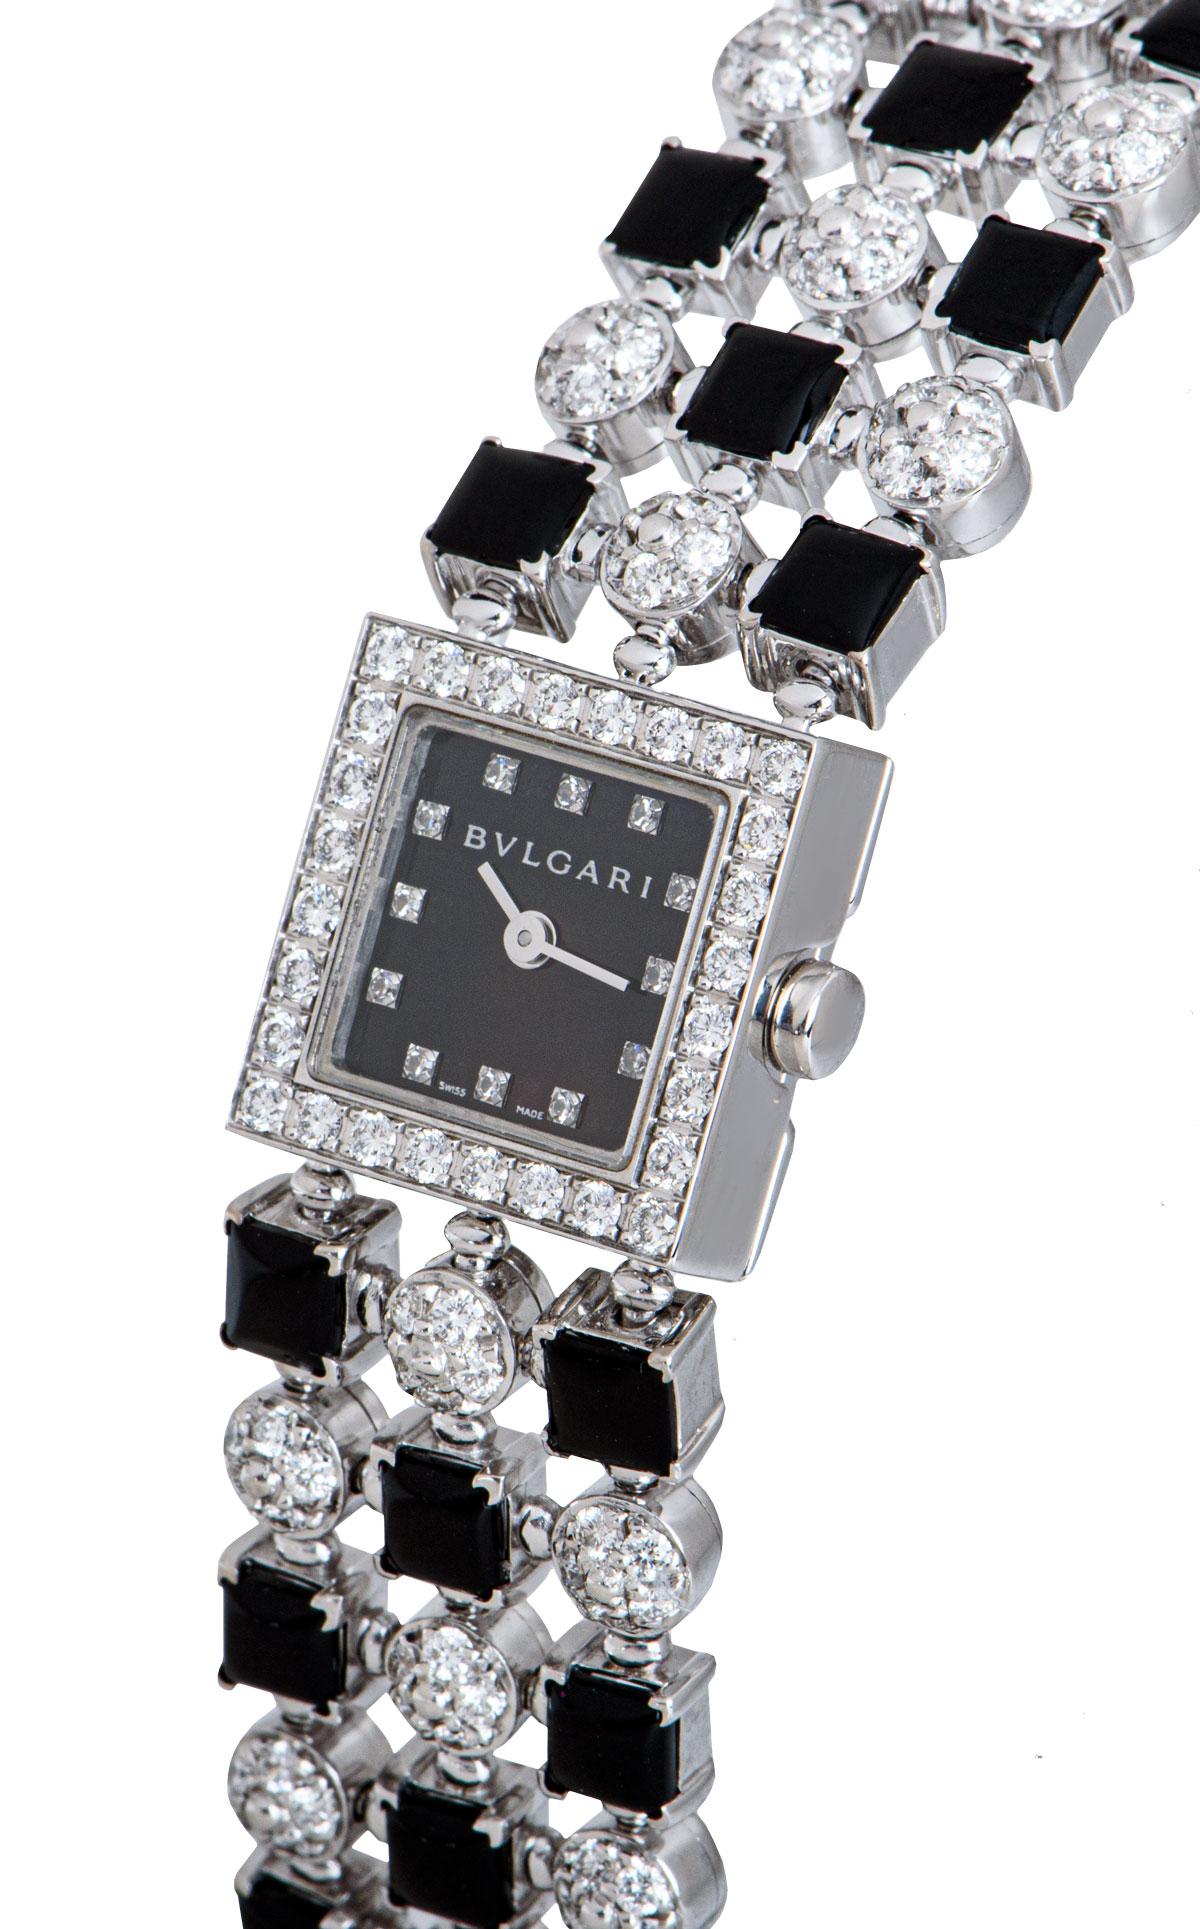 A 16 mm 18k White Gold Lucea Ladies Wristwatch, black dial set with 12 applied round brilliant cut diamond hour markers, a fixed 18k white gold bezel set with 28 round brilliant cut diamonds, 18k white gold case engraved with 